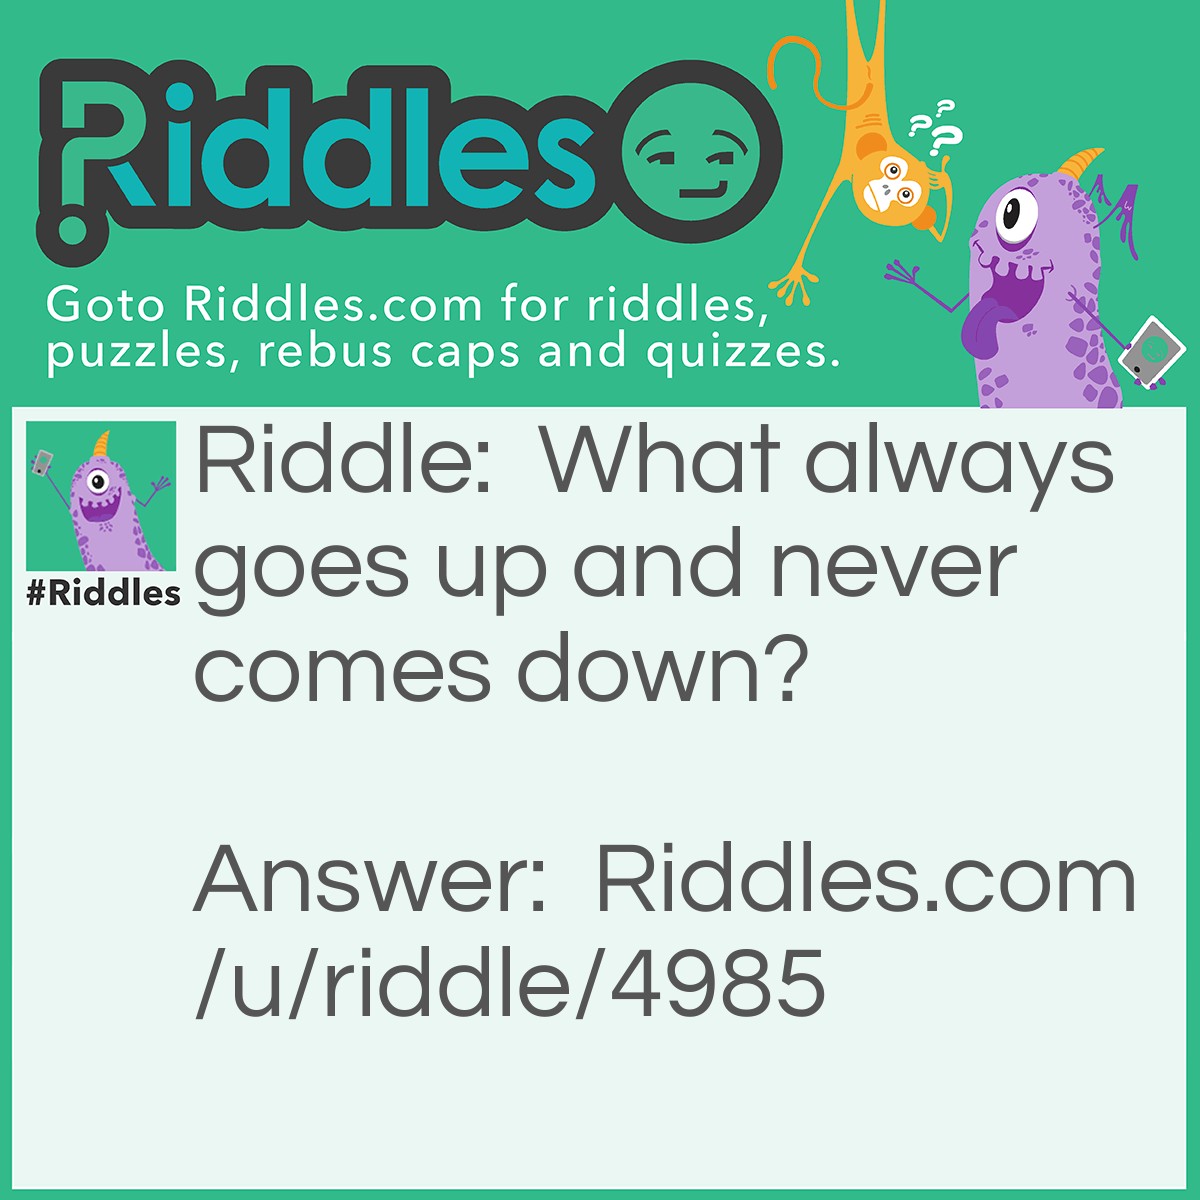 Riddle: What always goes up and never comes down? Answer: Your age.